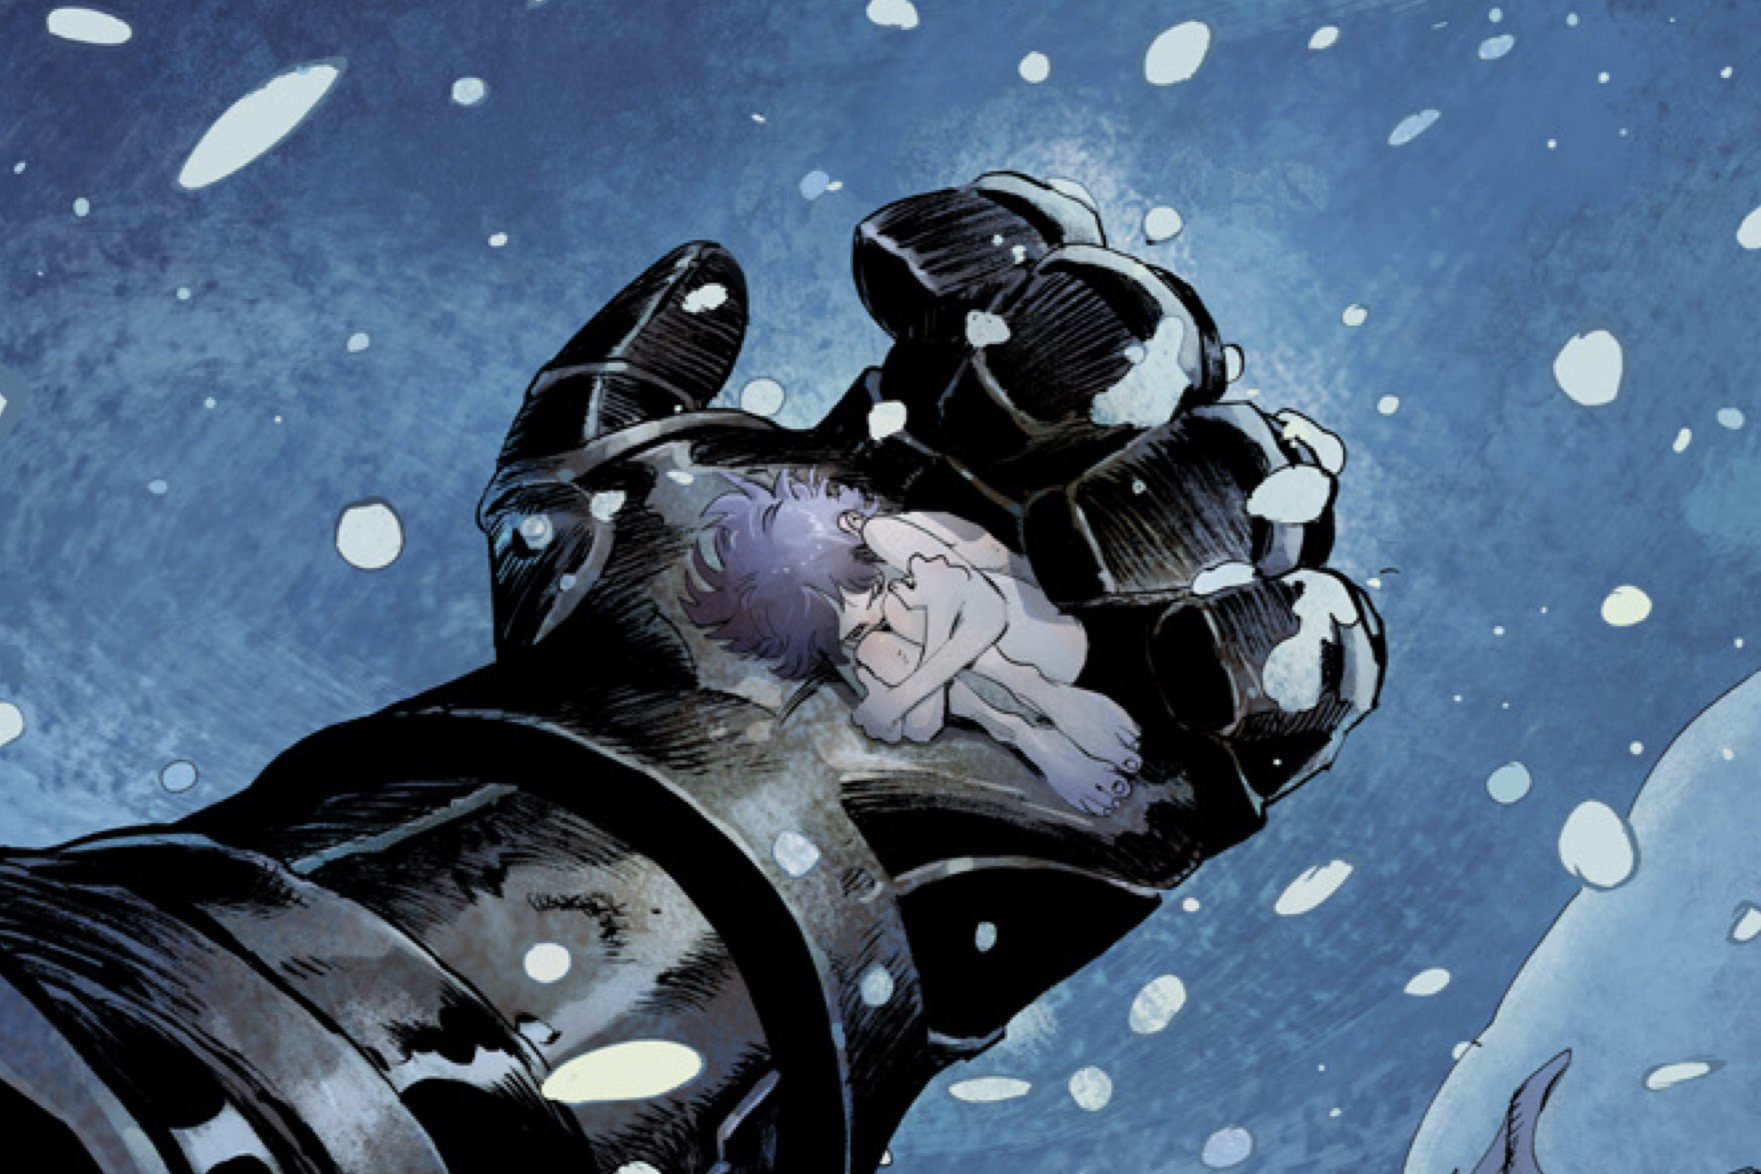 A huge metal hand holds a small naked child in a snowy environment in Step by Bloody Step #1 (2022).